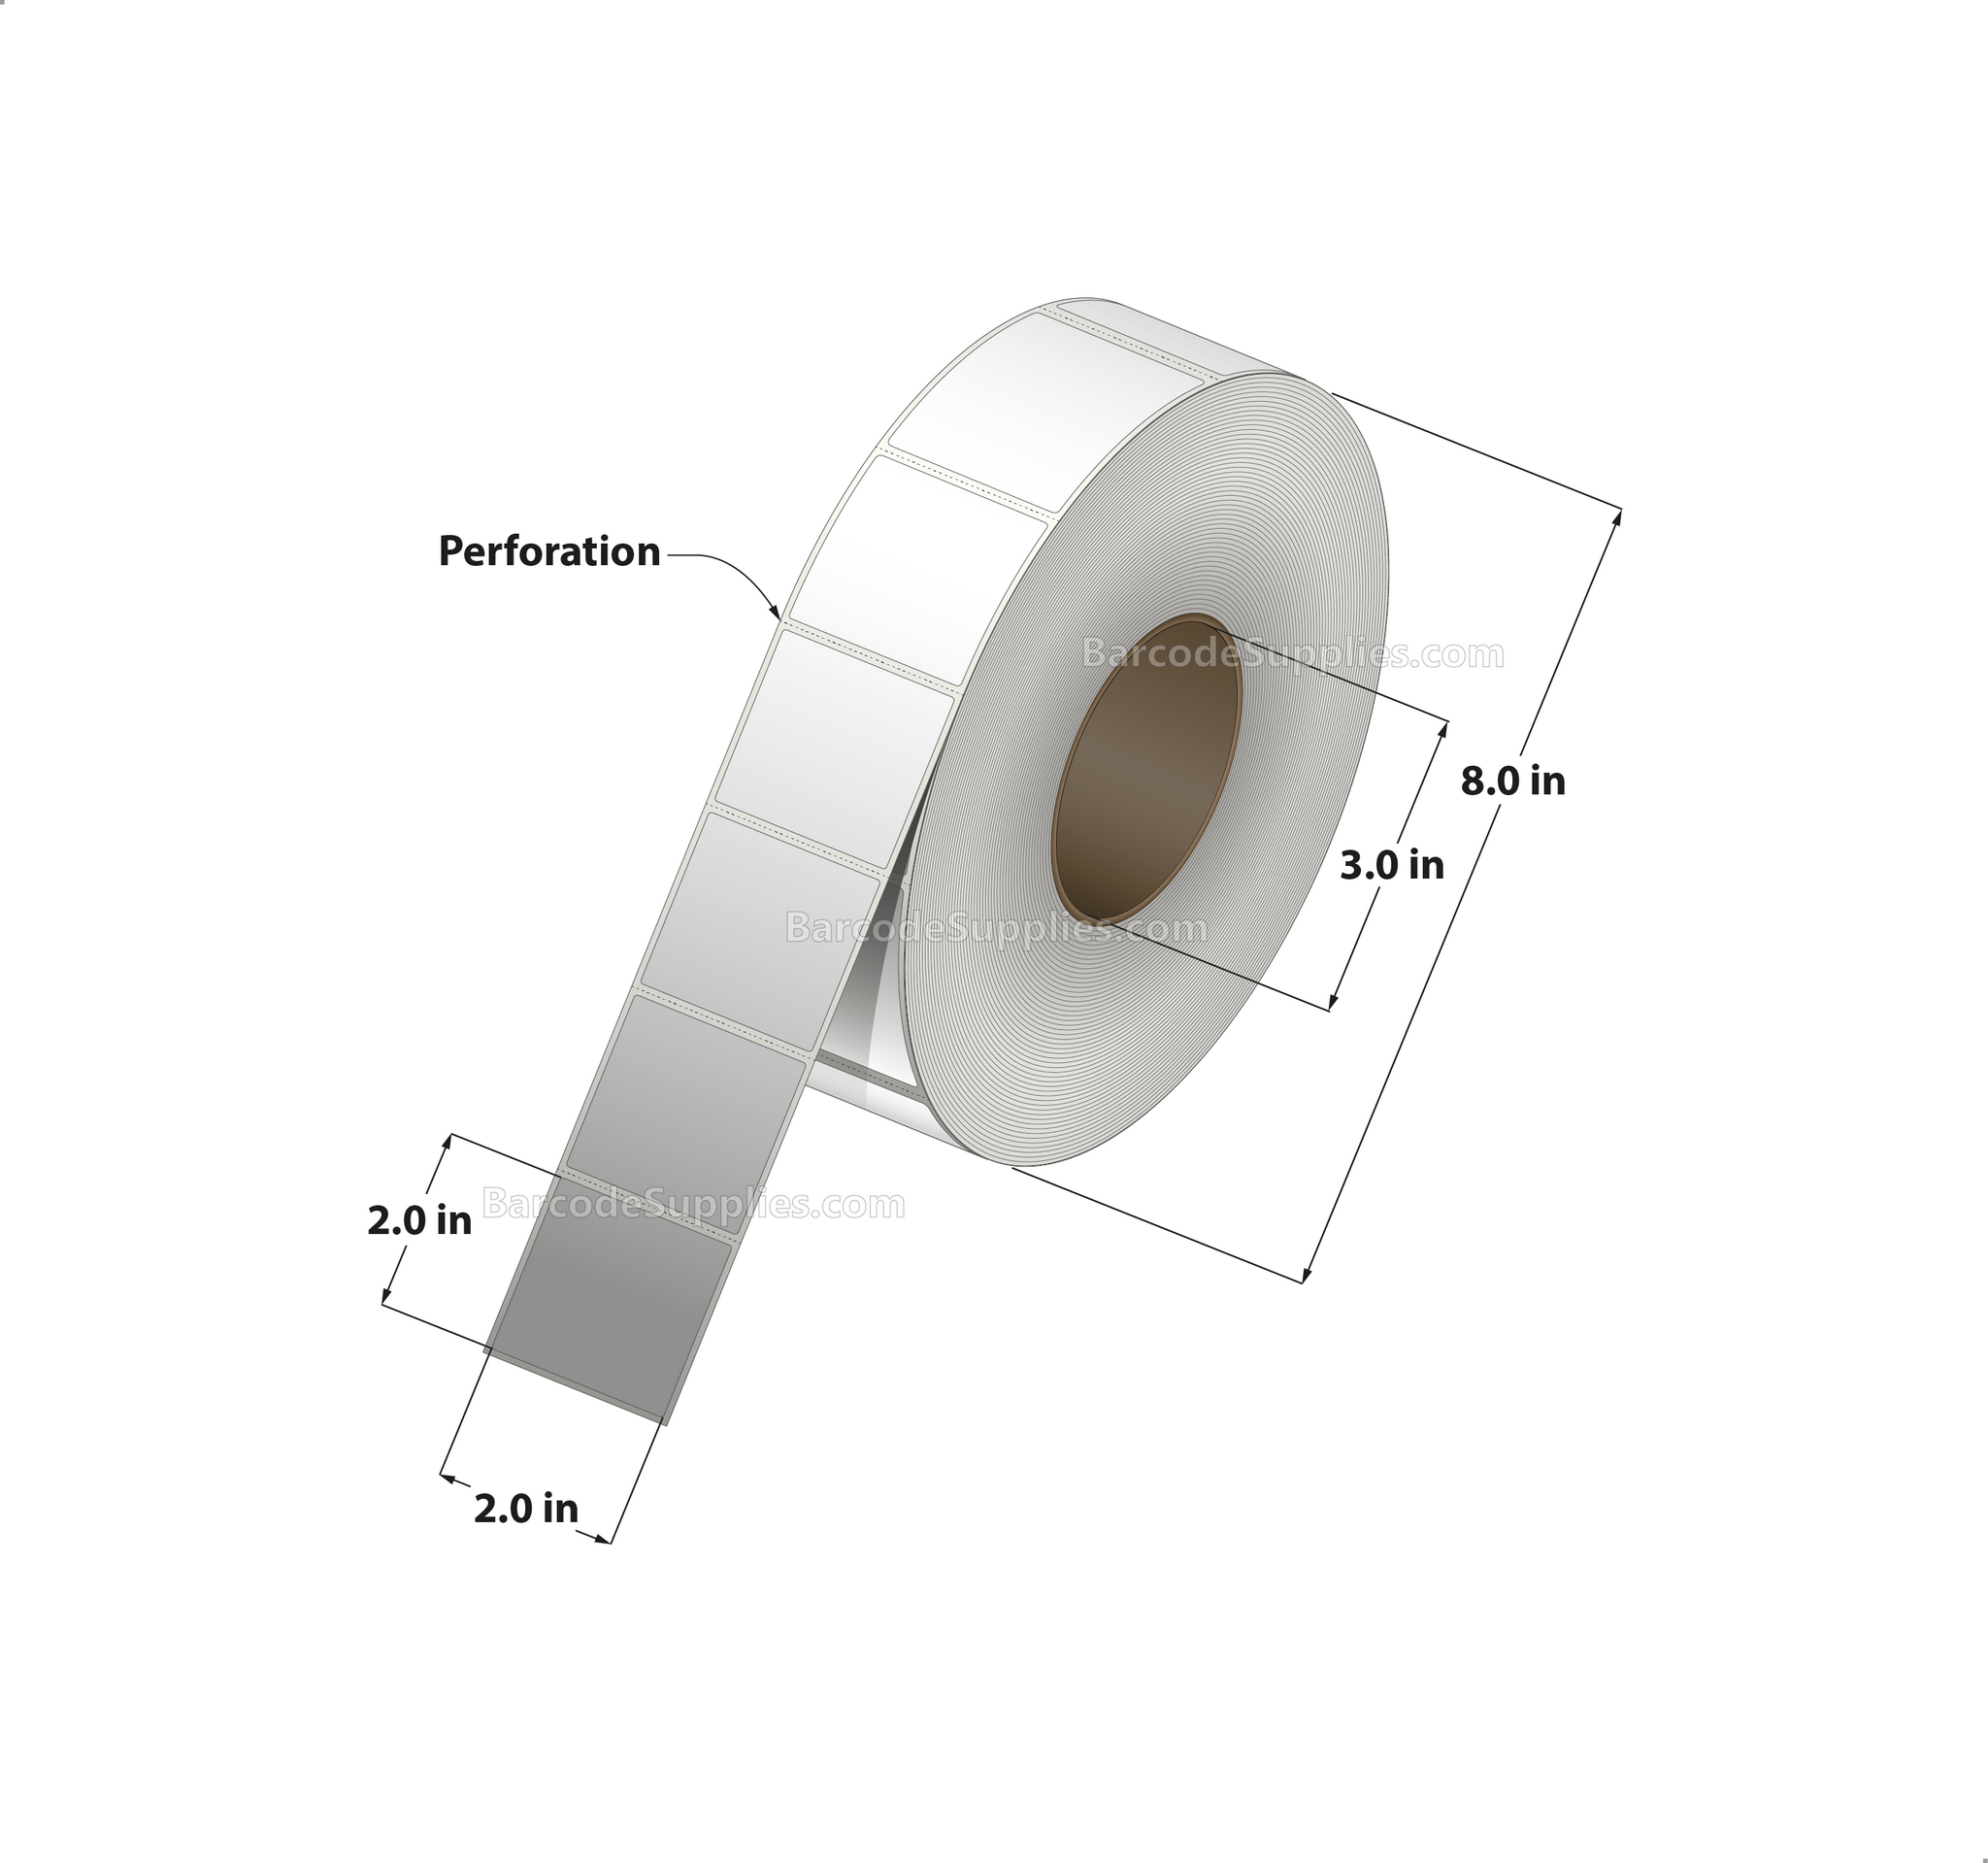 2 x 2 Direct Thermal White Labels With Acrylic Adhesive - Perforated - 2900 Labels Per Roll - Carton Of 8 Rolls - 23200 Labels Total - MPN: RD-2-2-2900-3 - BarcodeSource, Inc.